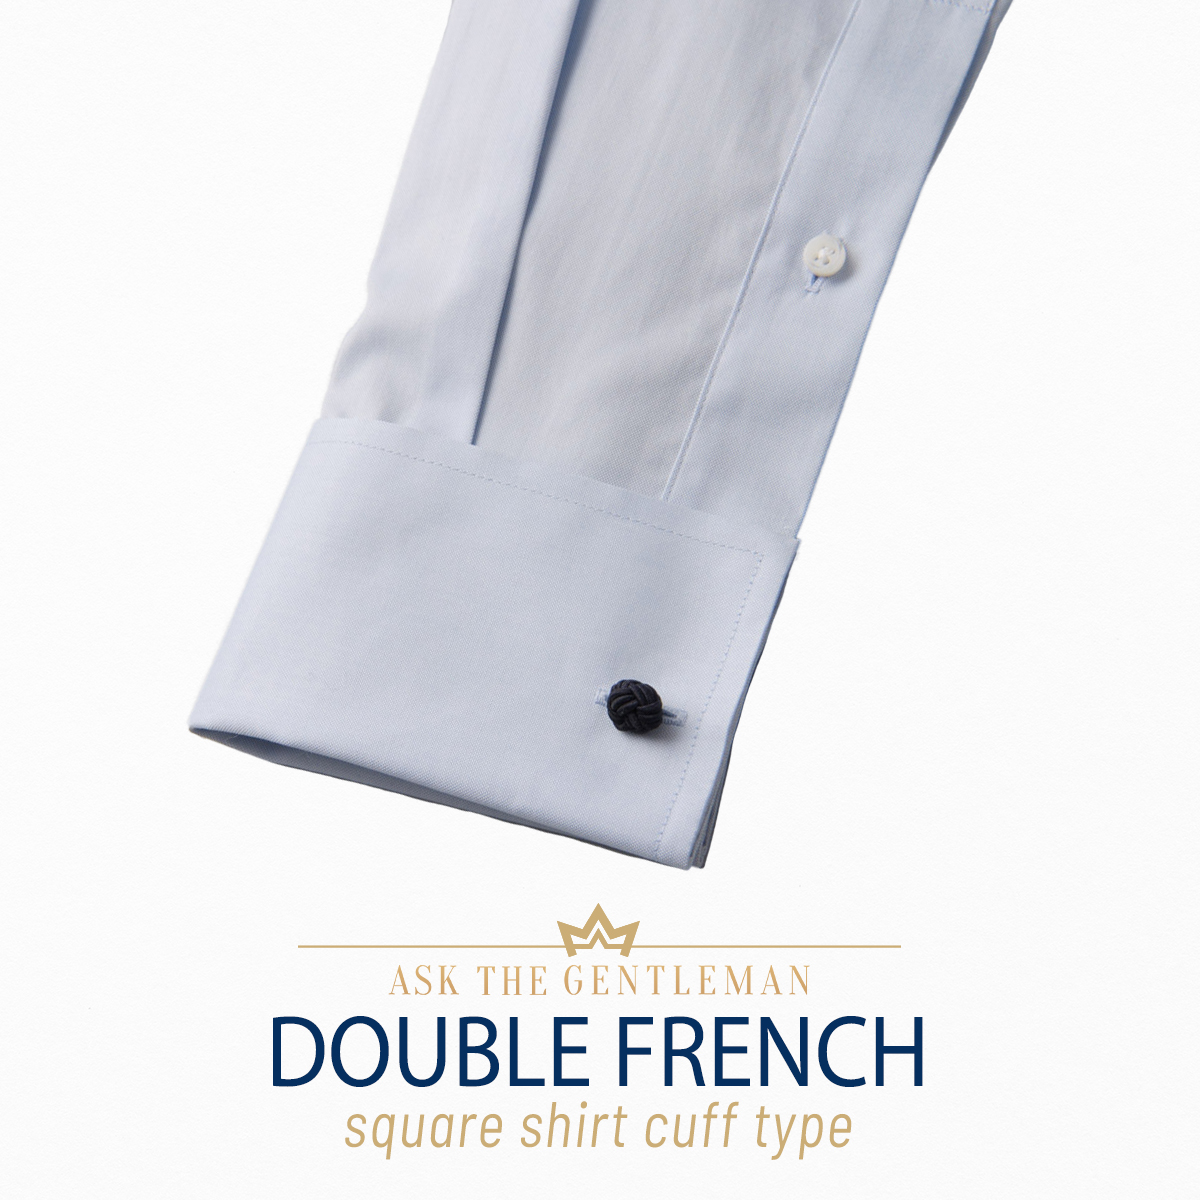 Double French cuff